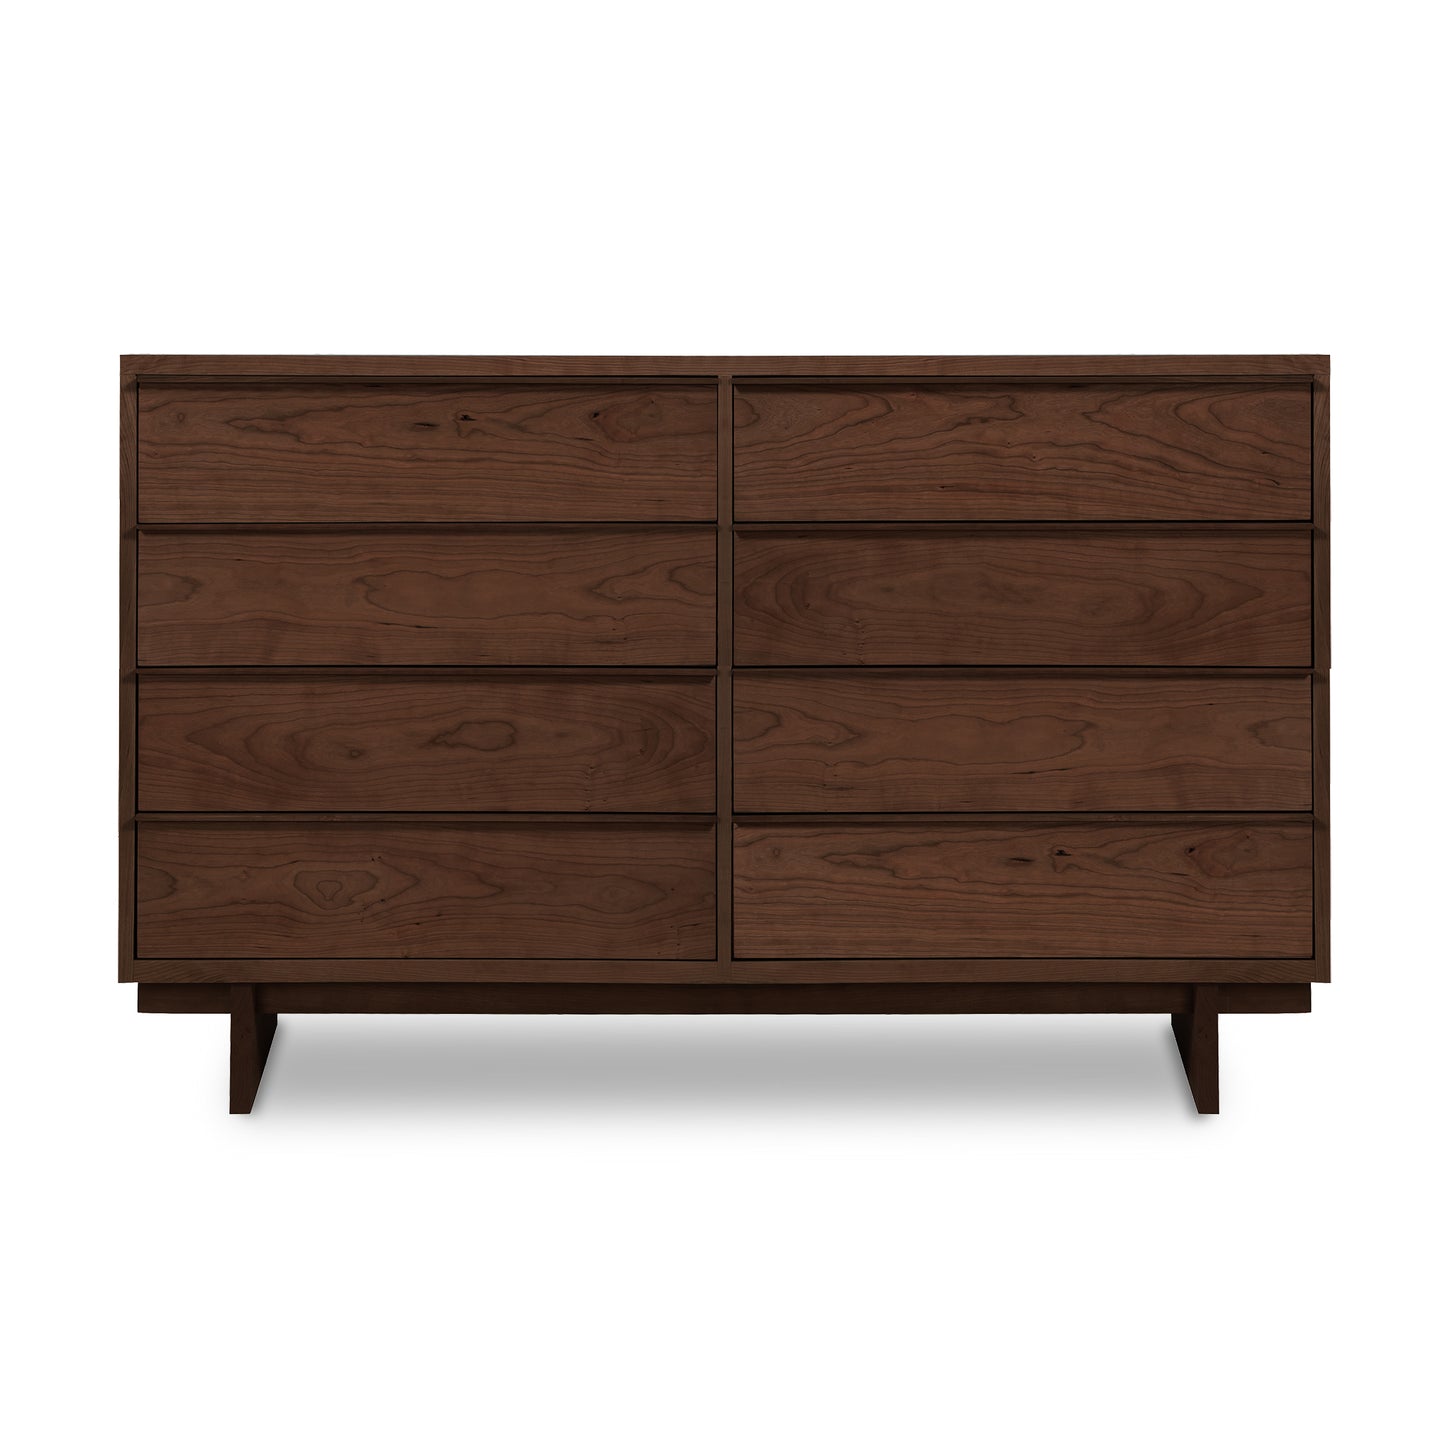 A modern solid wood dresser crafted from cherry hardwood, featuring six drawers, set against a plain background is the Vermont Furniture Designs Kipling 8-Drawer Dresser.